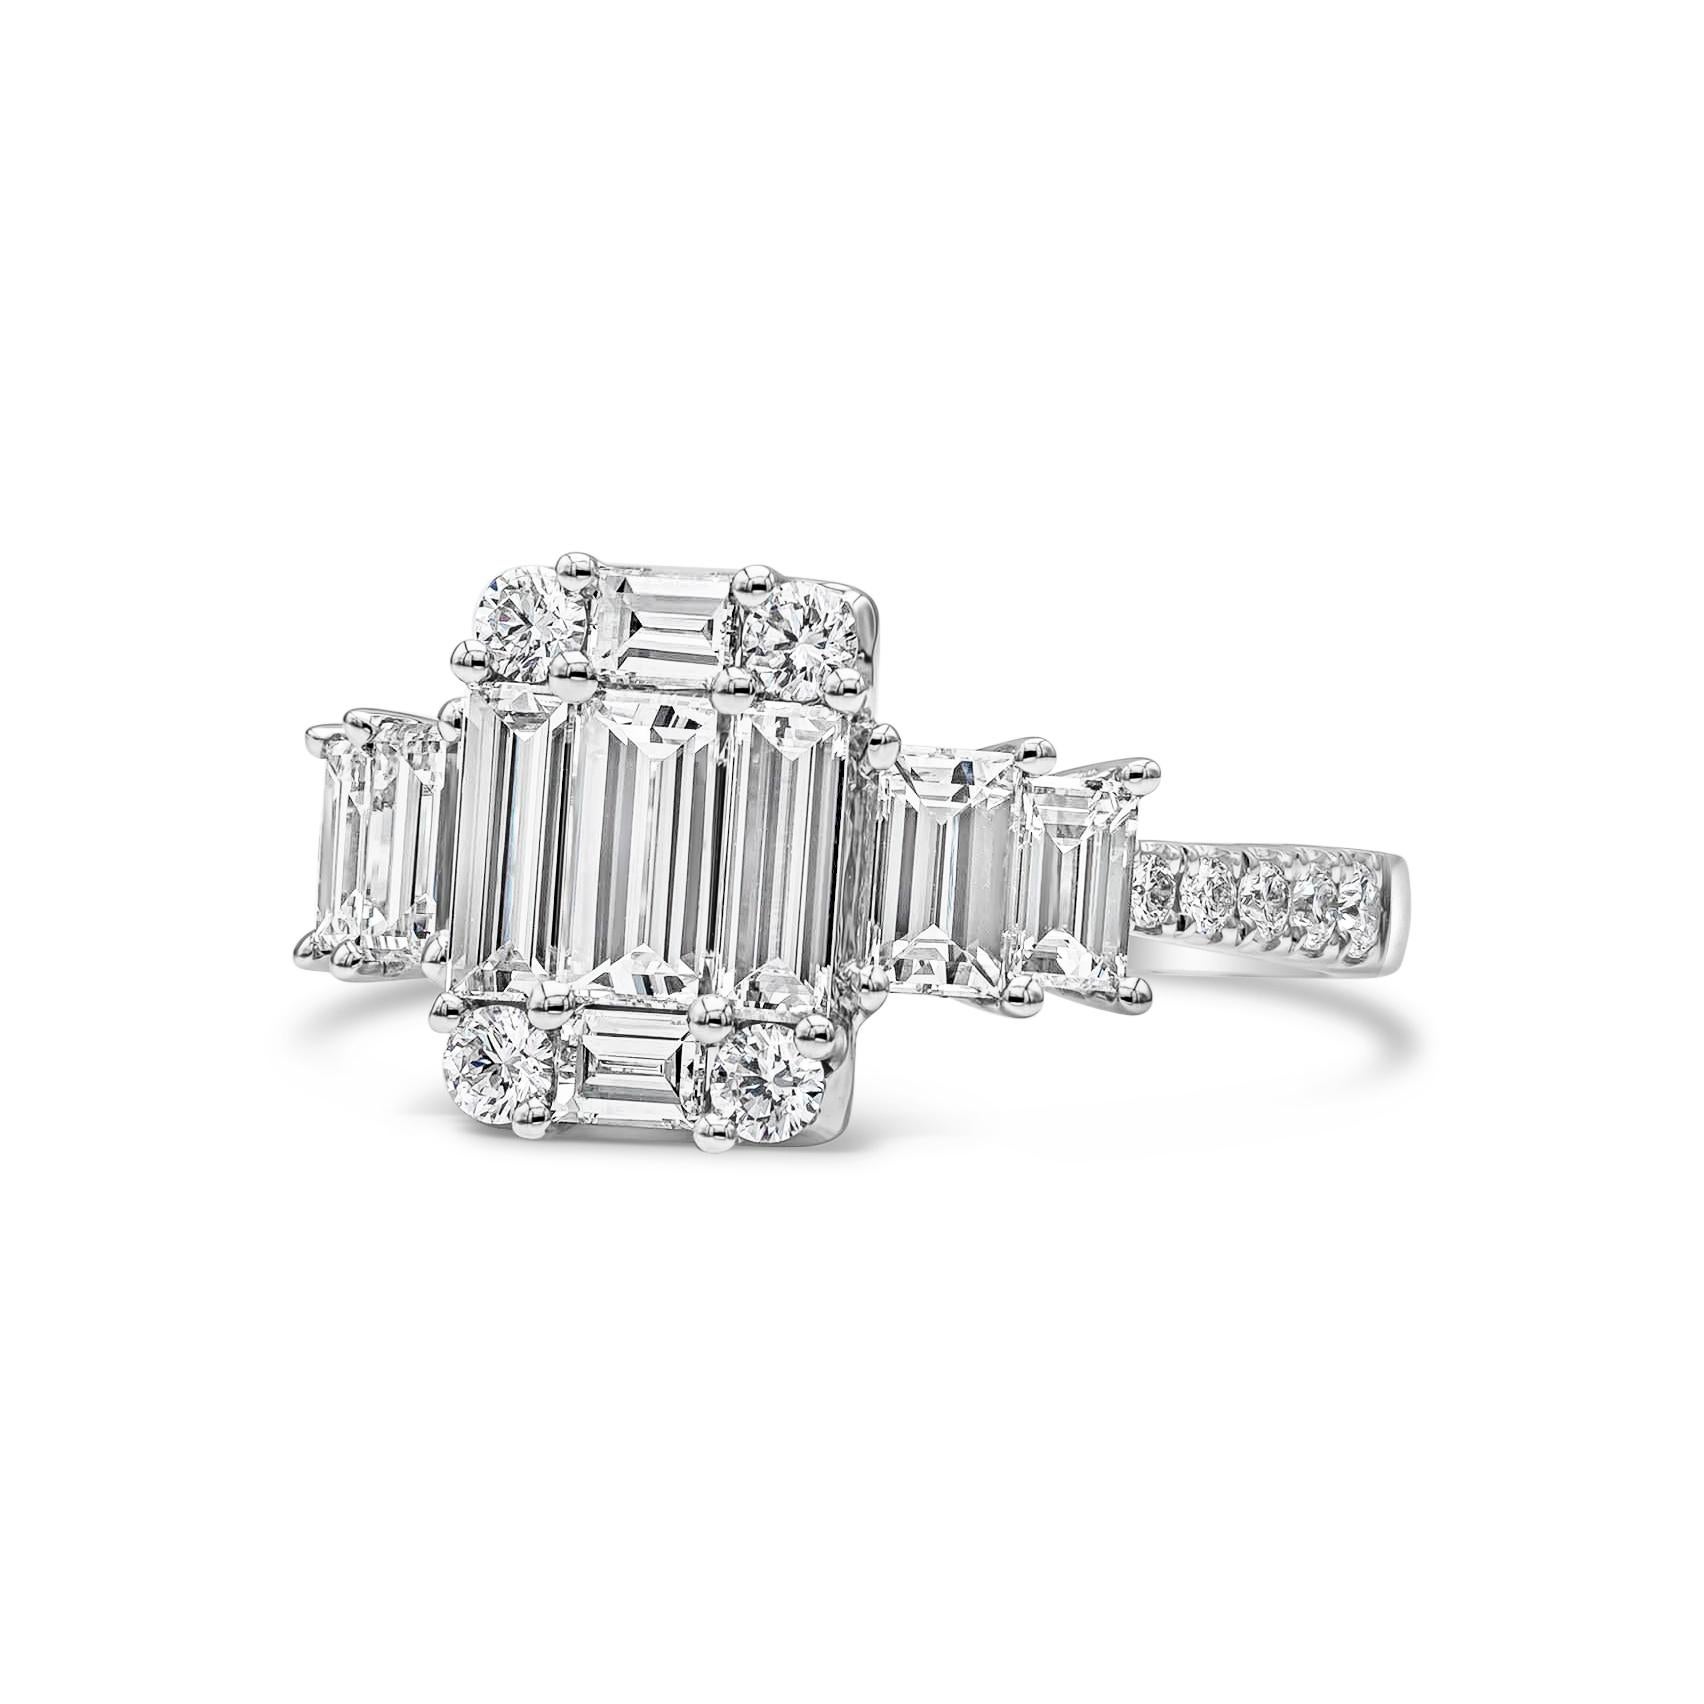 Showcasing a cluster of baguette and round diamonds, arranged like an emerald cut diamond. Flanking the center are two smaller baguette cut diamonds on either side and set in a diamond encrusted shank in a pave setting. Baguette diamonds weigh 1.51